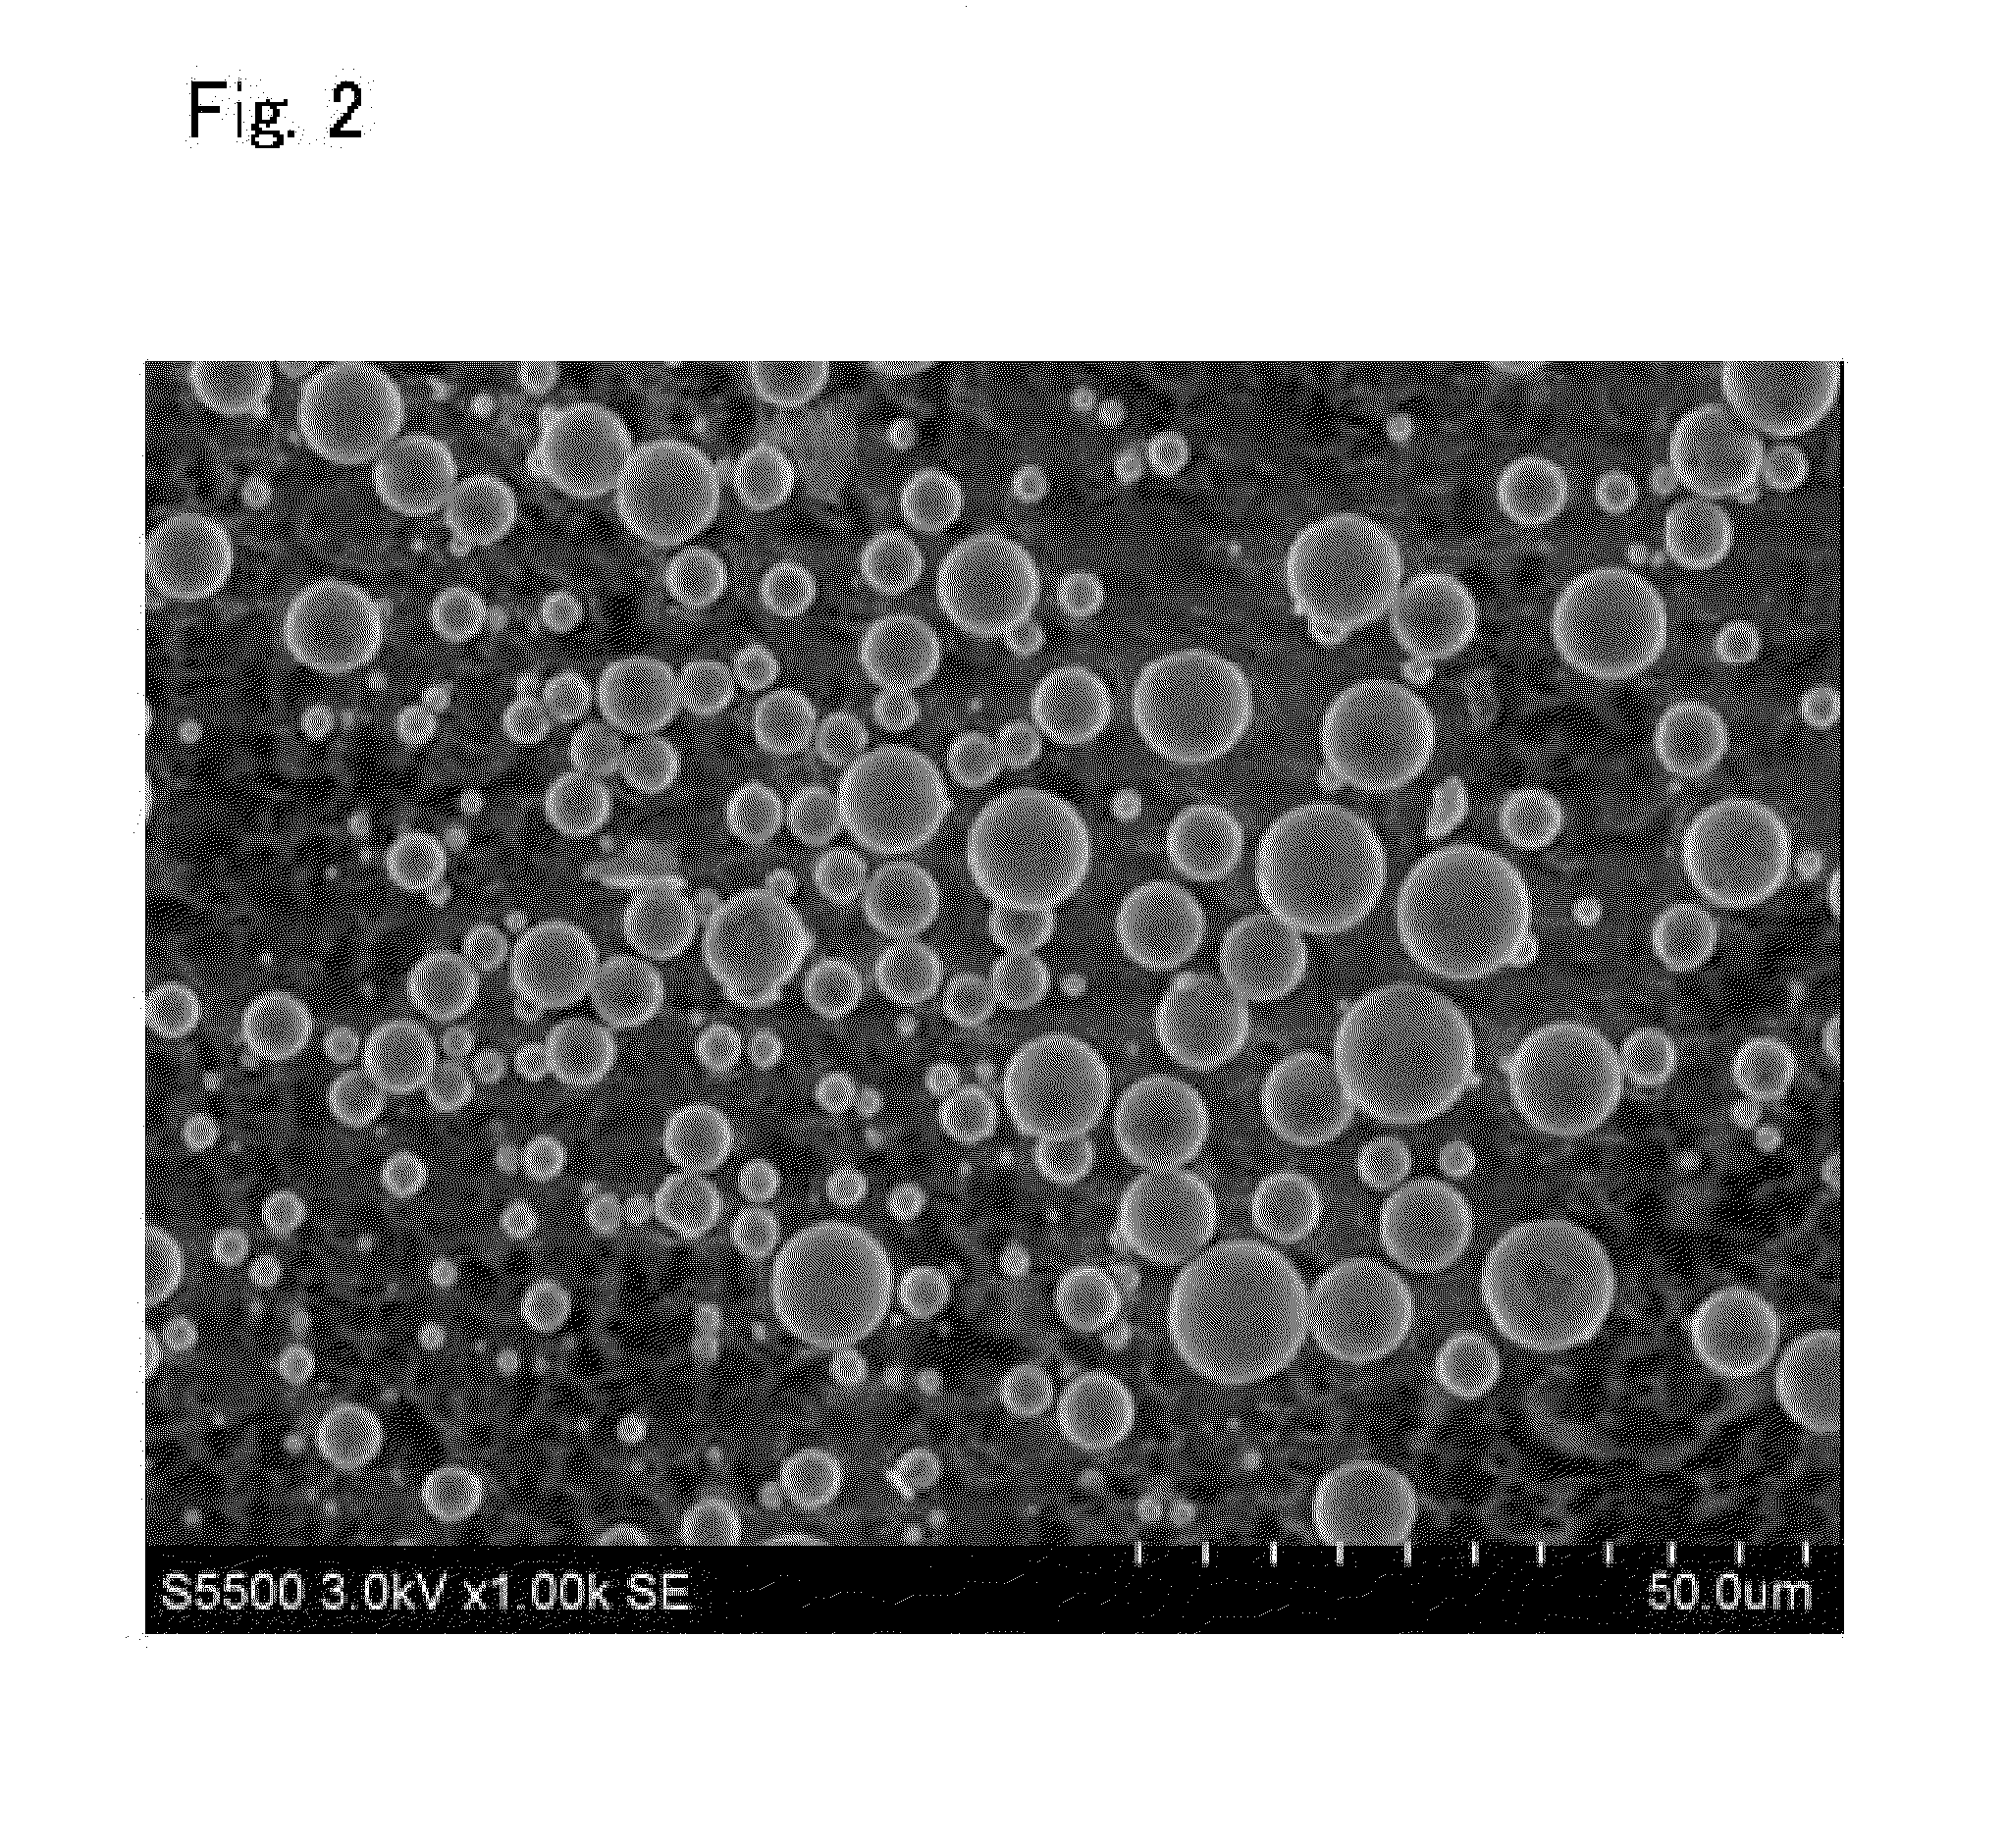 Aeogel and method for manufacture thereof